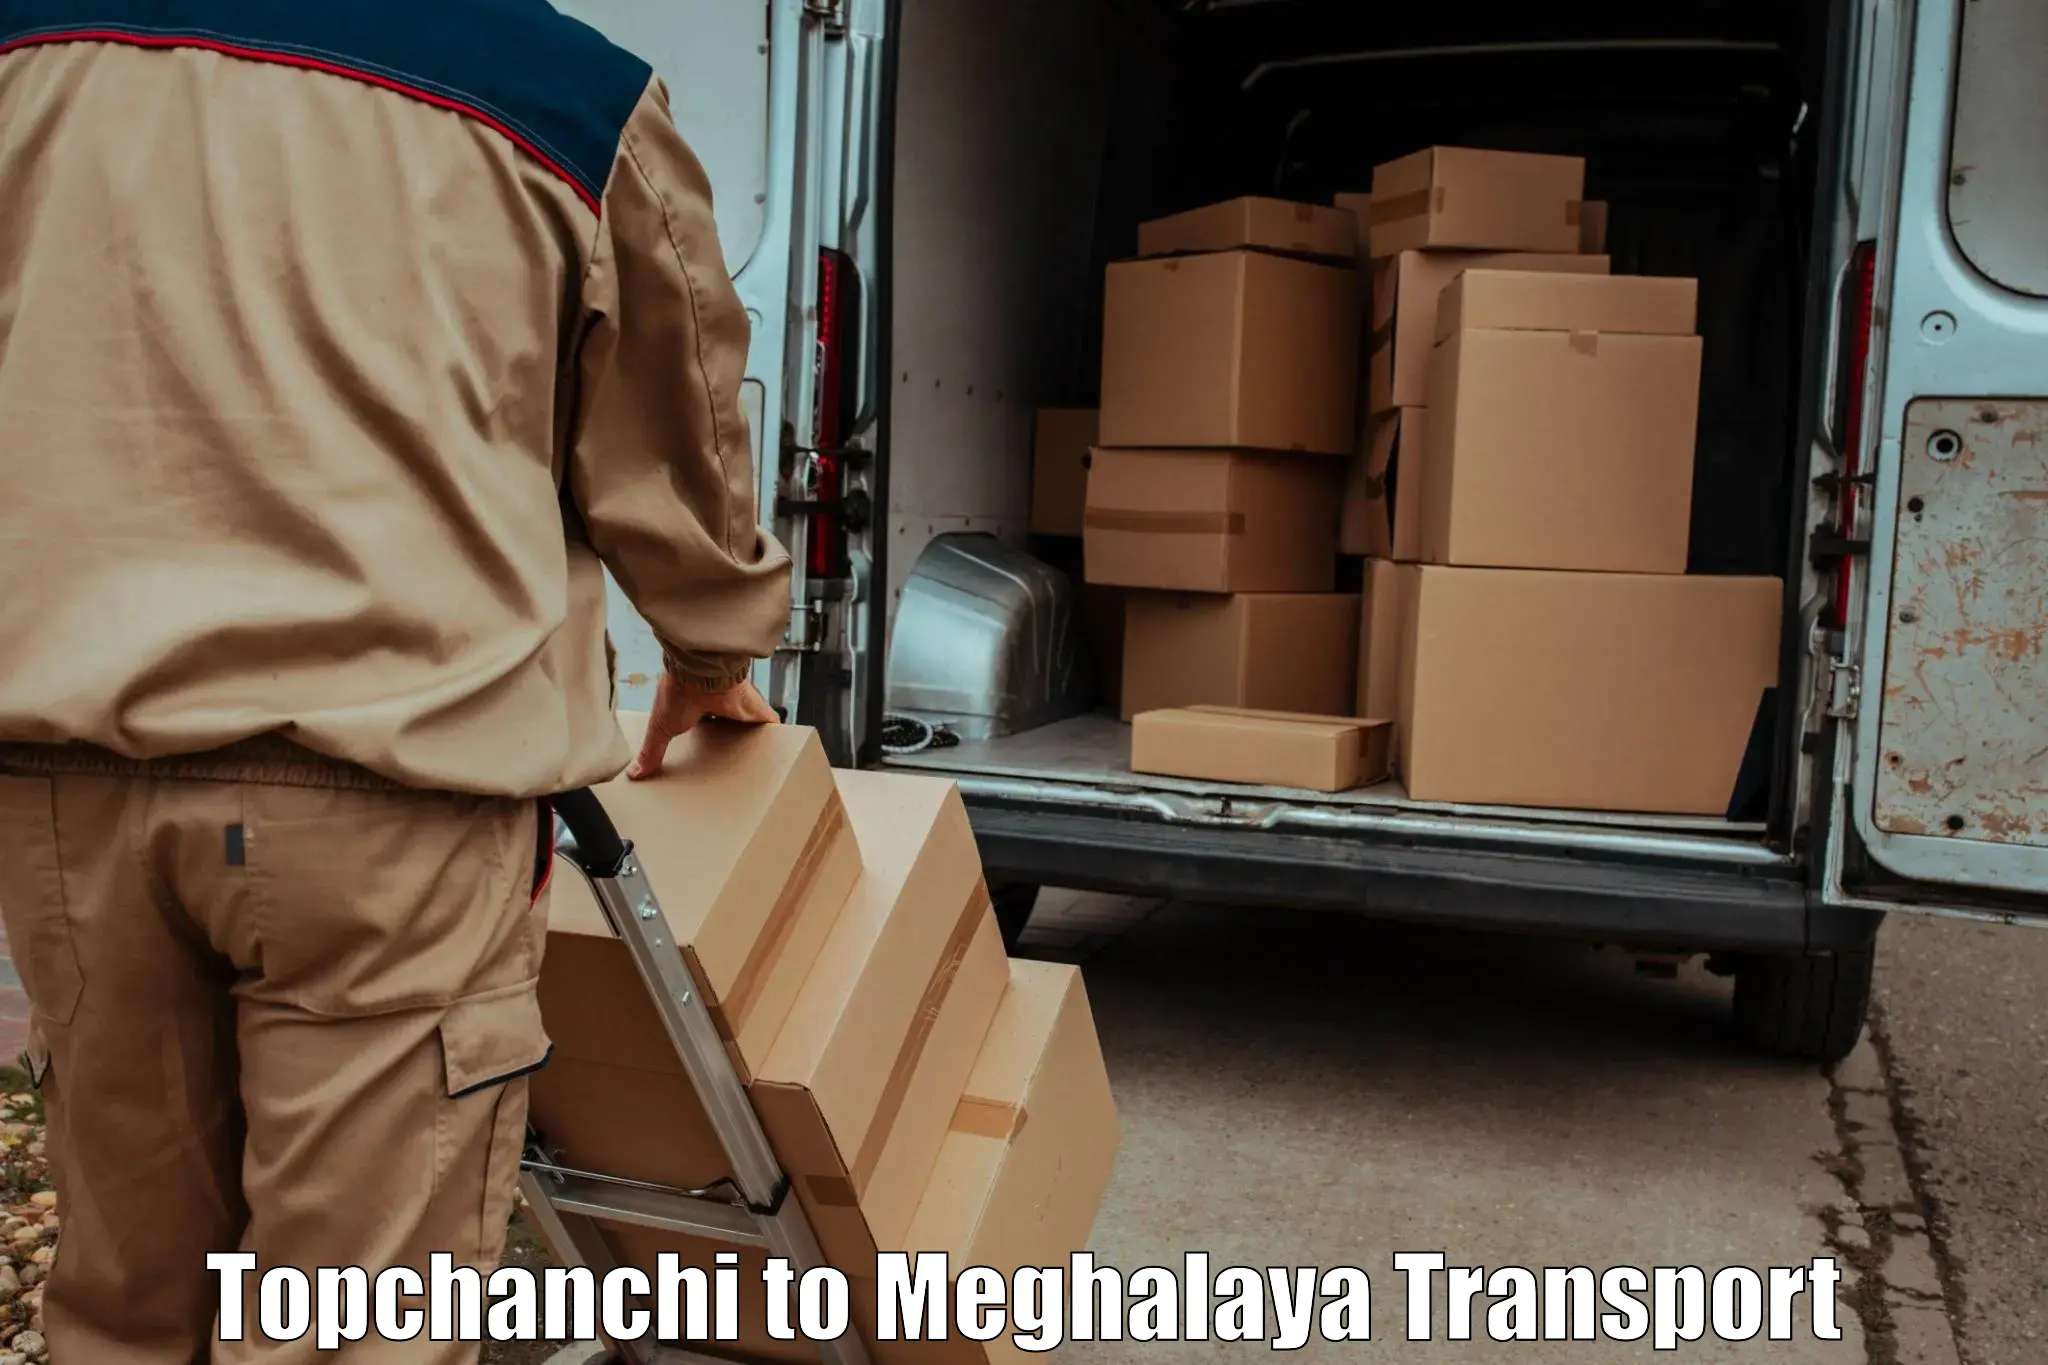 Air freight transport services Topchanchi to Shillong